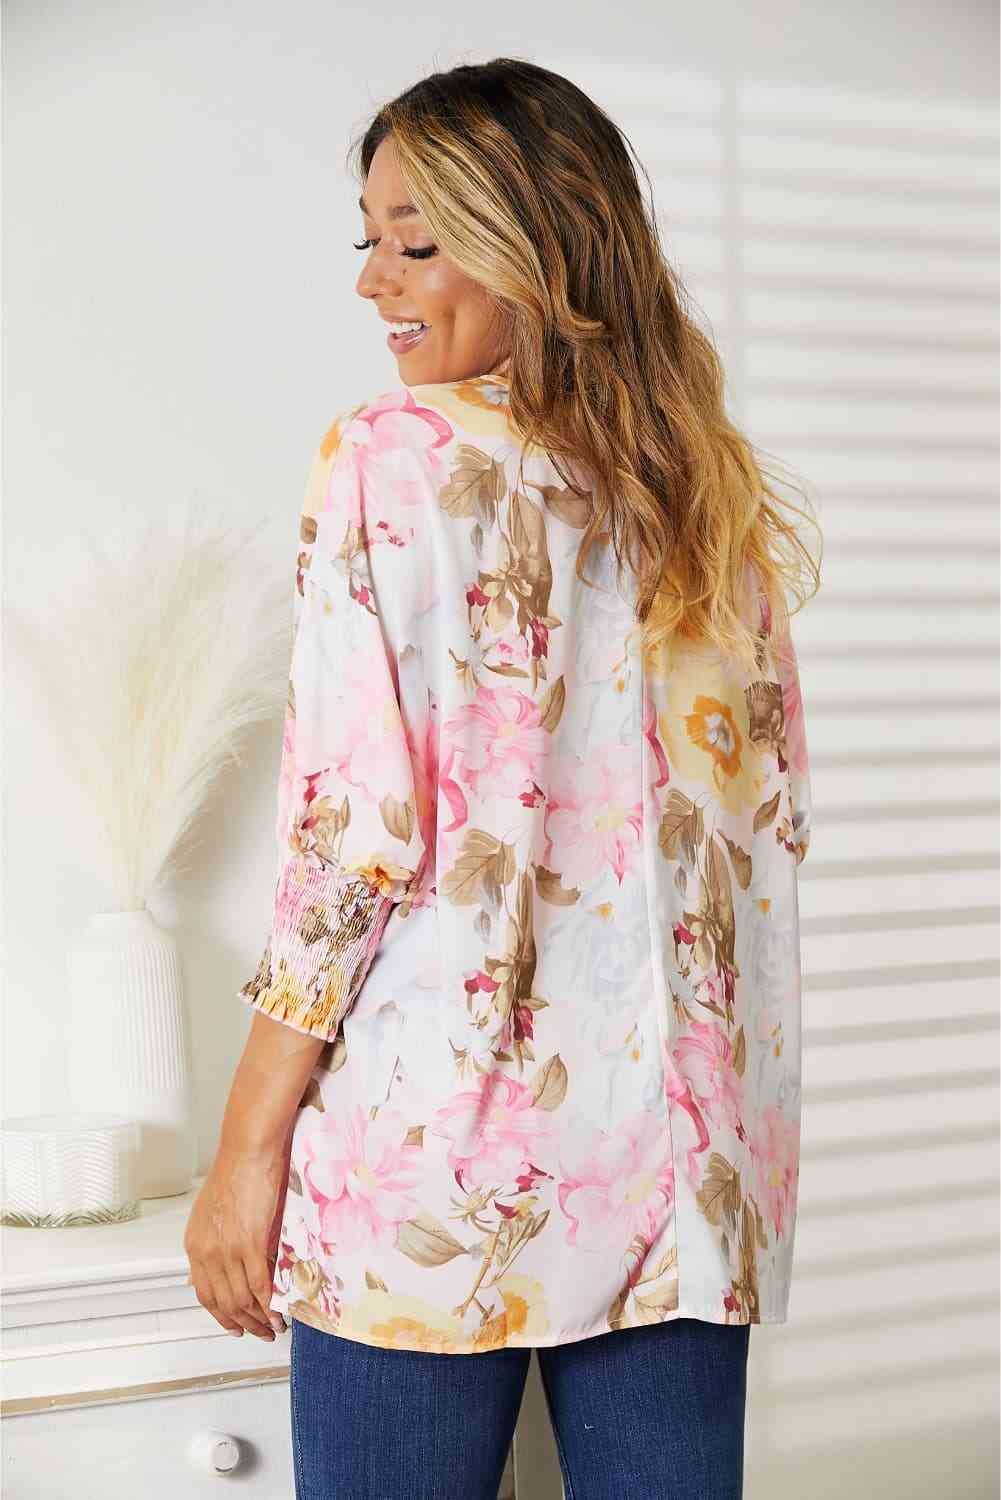 Floral Round Neck Three-Quarter Sleeve Top - Kawaii Stop - Double Take, Dress Up or Down, Elegant Look, Fashionable Top, Floral Three-Quarter Sleeve Top, Pop of Color, Round Neck Blouse, Ship from USA, Statement Piece, Stylish Apparel, Versatile Style, Vibrant Fashion, Women's Clothing